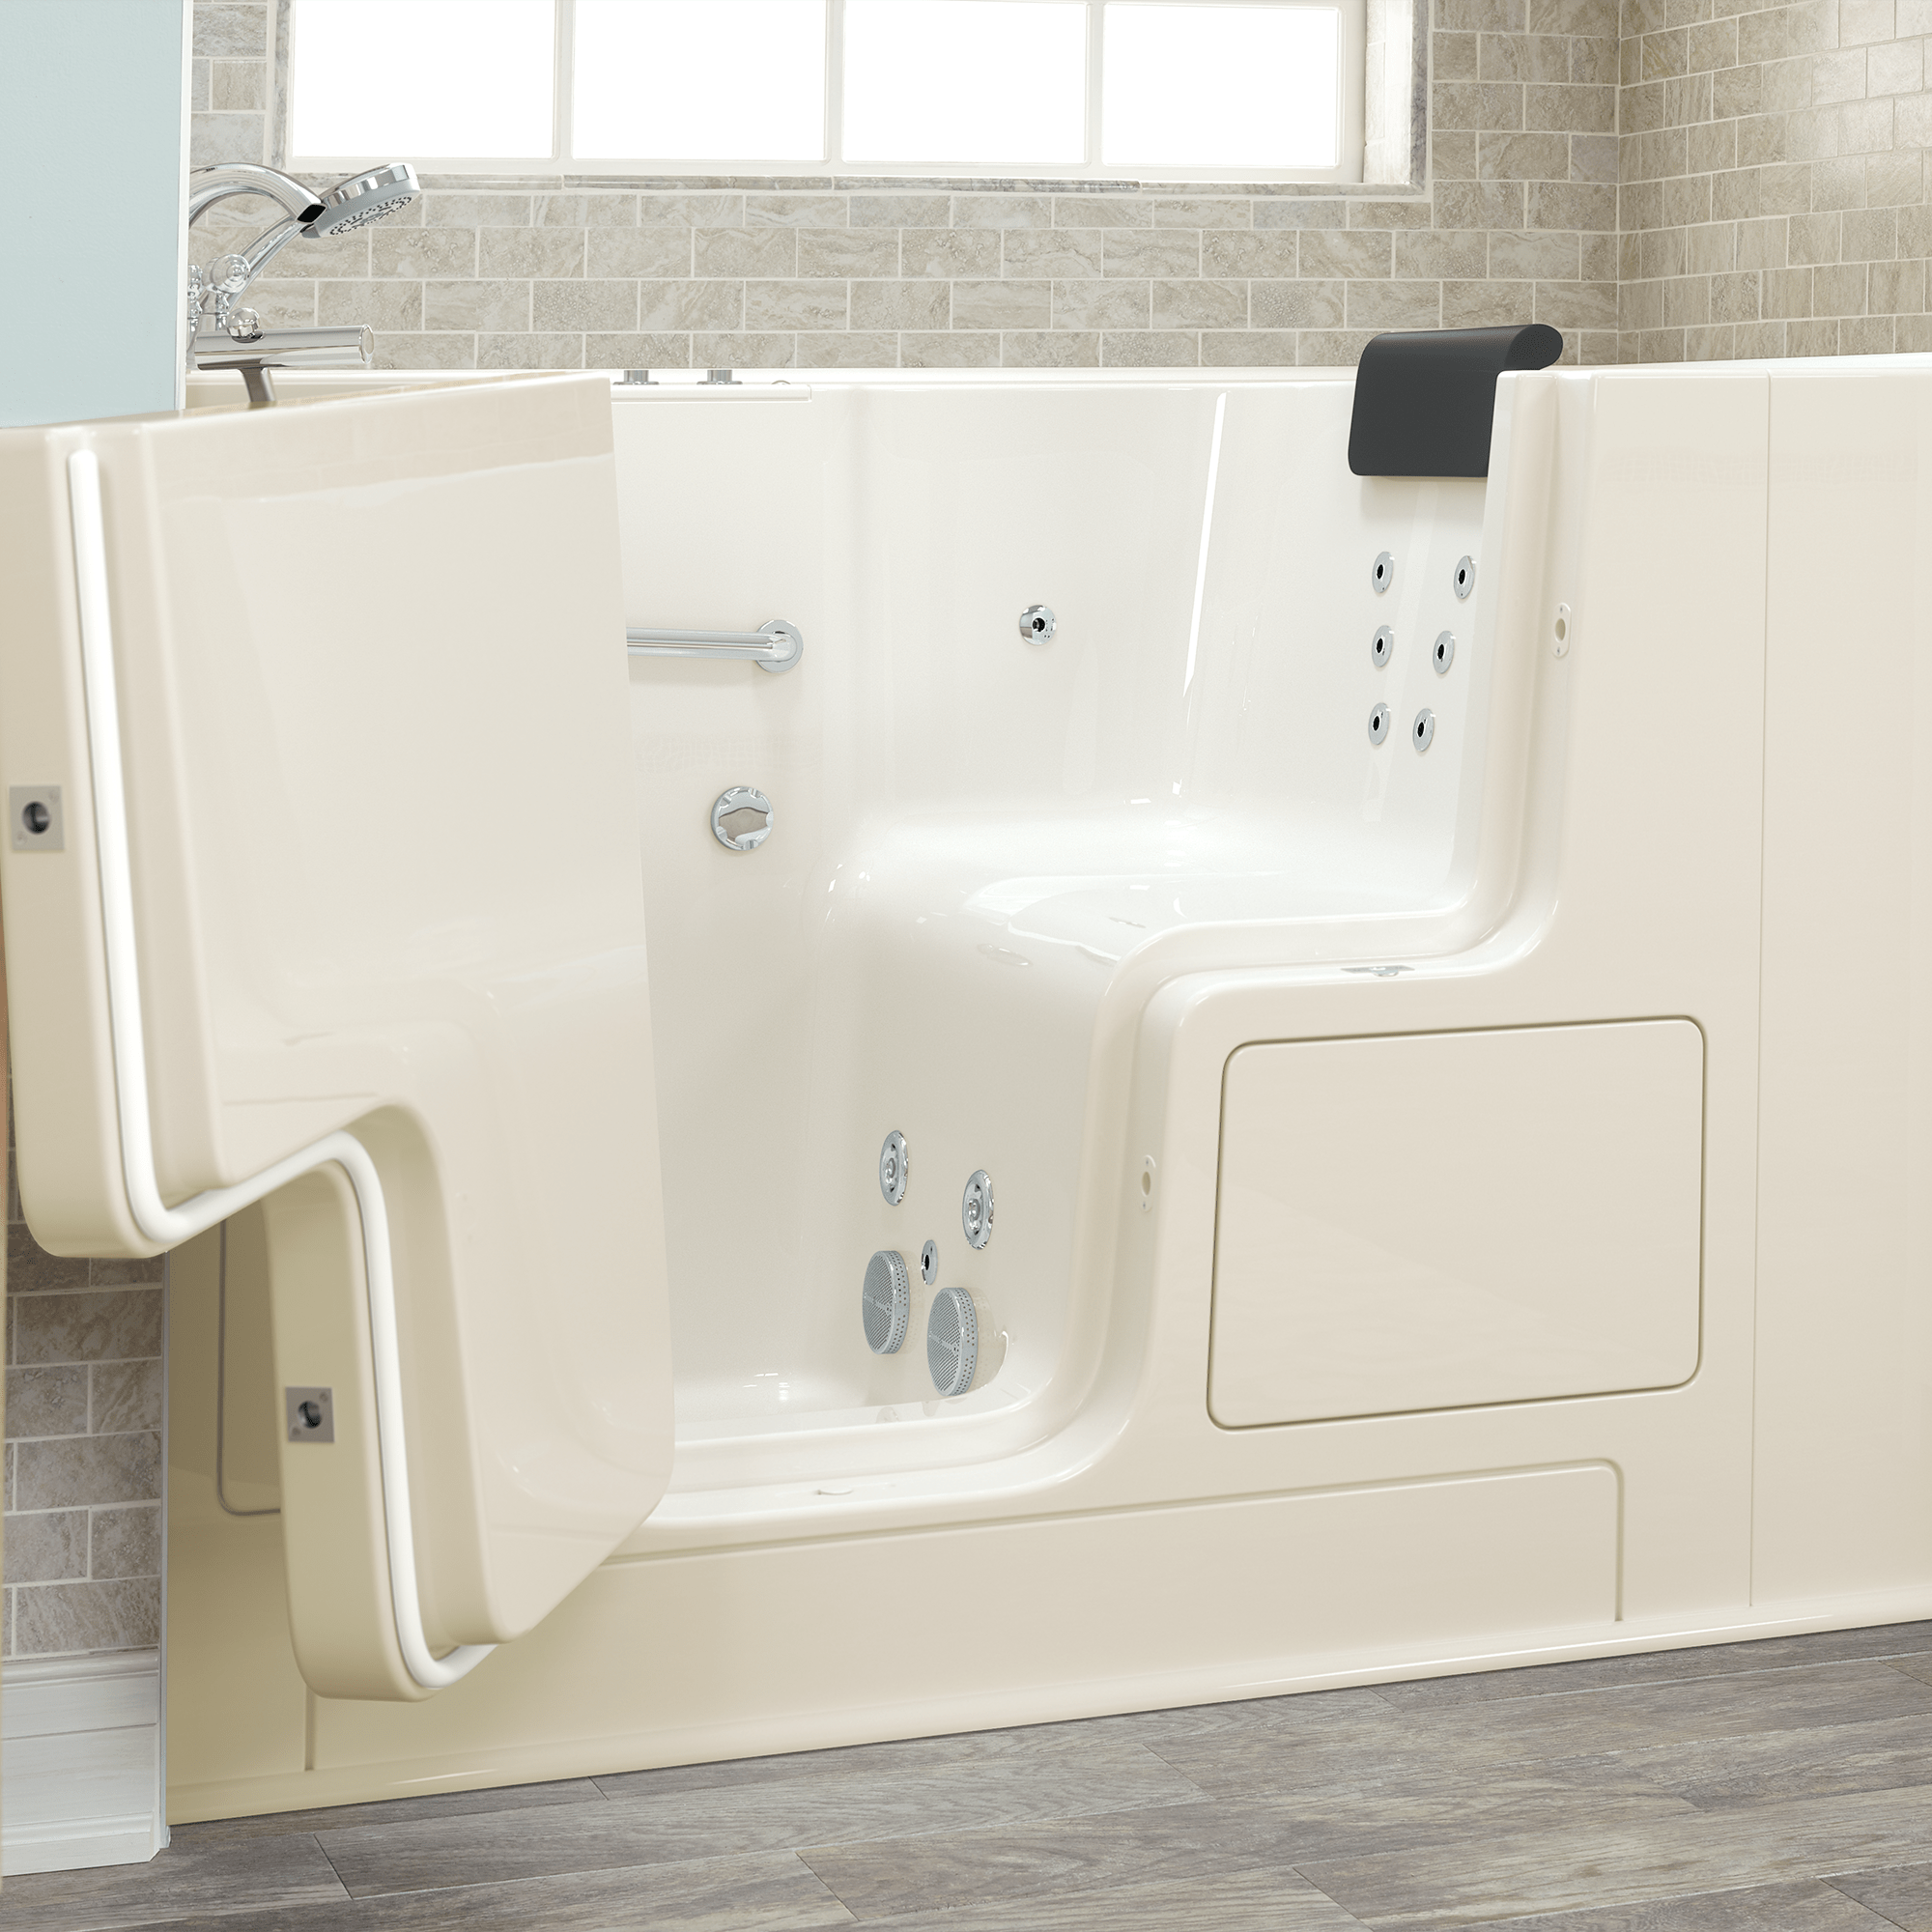 Gelcoat Premium Series 32 x 52  Inch Walk in Tub With Whirlpool System   Left Hand Drain With Faucet WIB LINEN